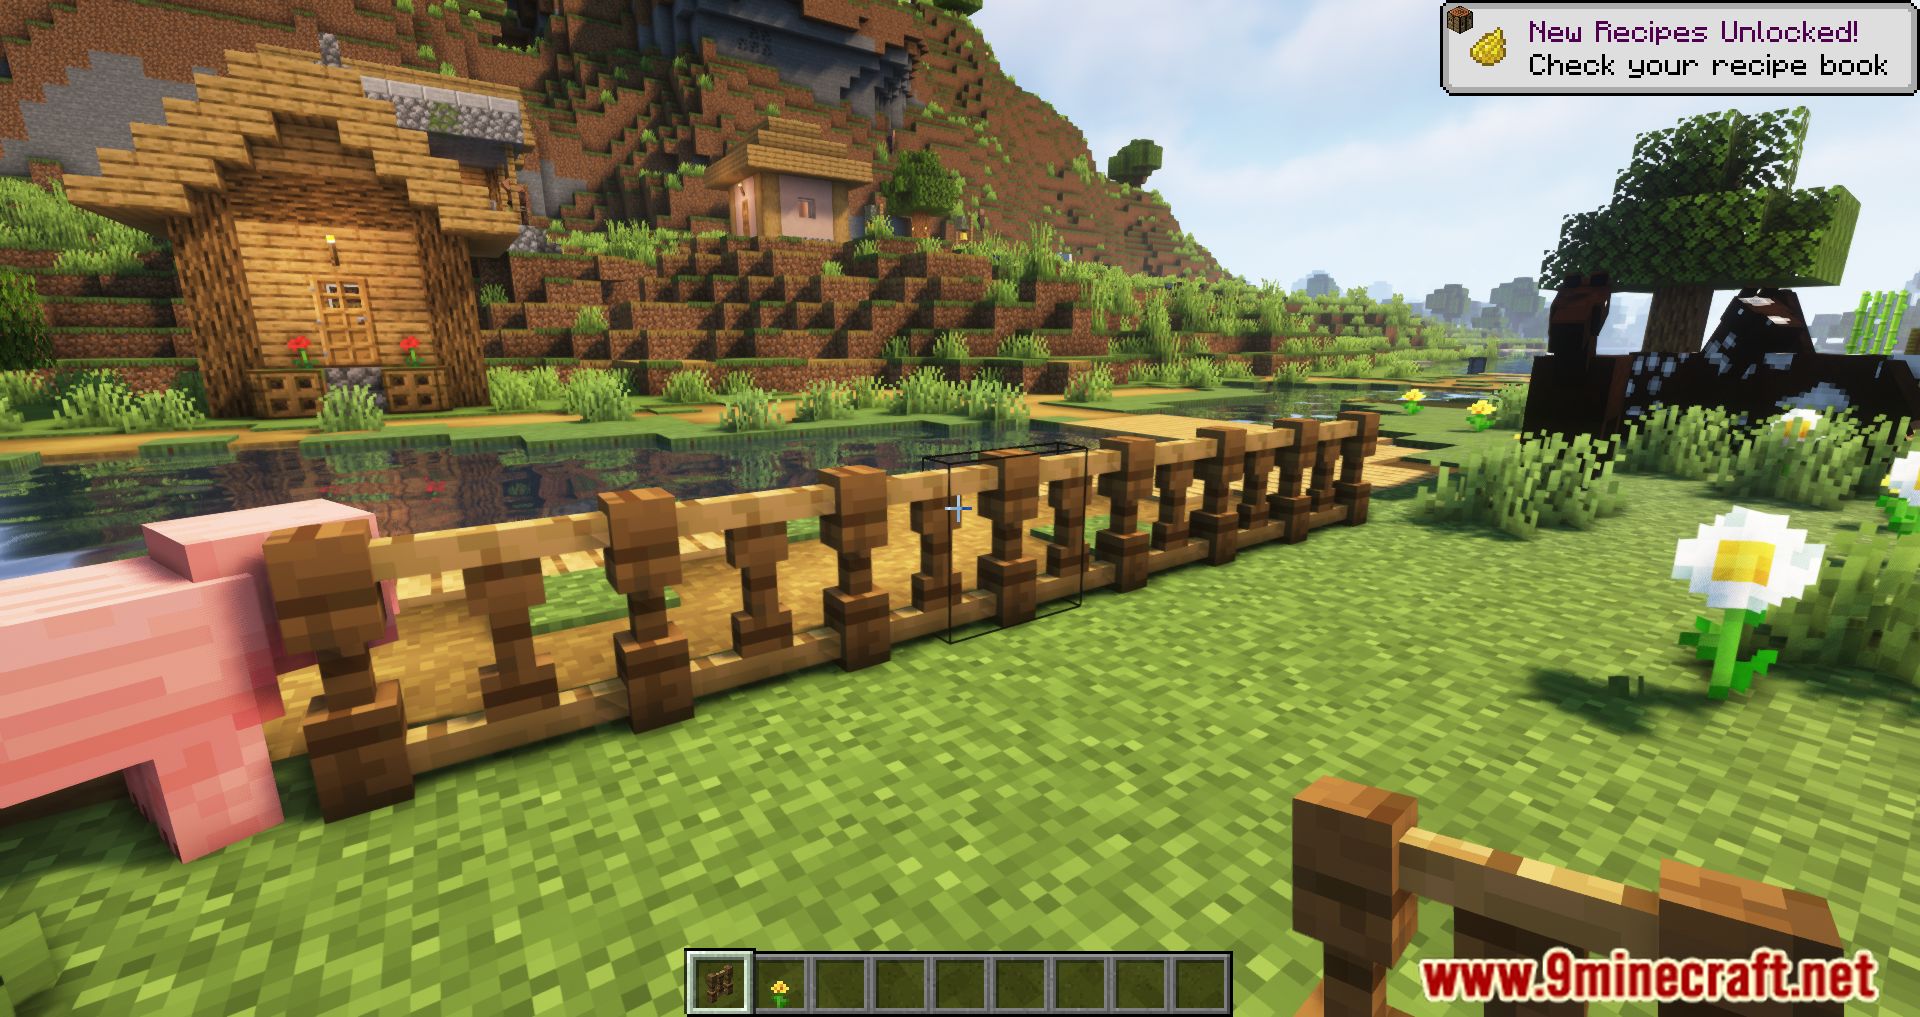 Custom Fences And Walls Mod (1.20.4, 1.19.2) - Many New Different Fences And Walls 8